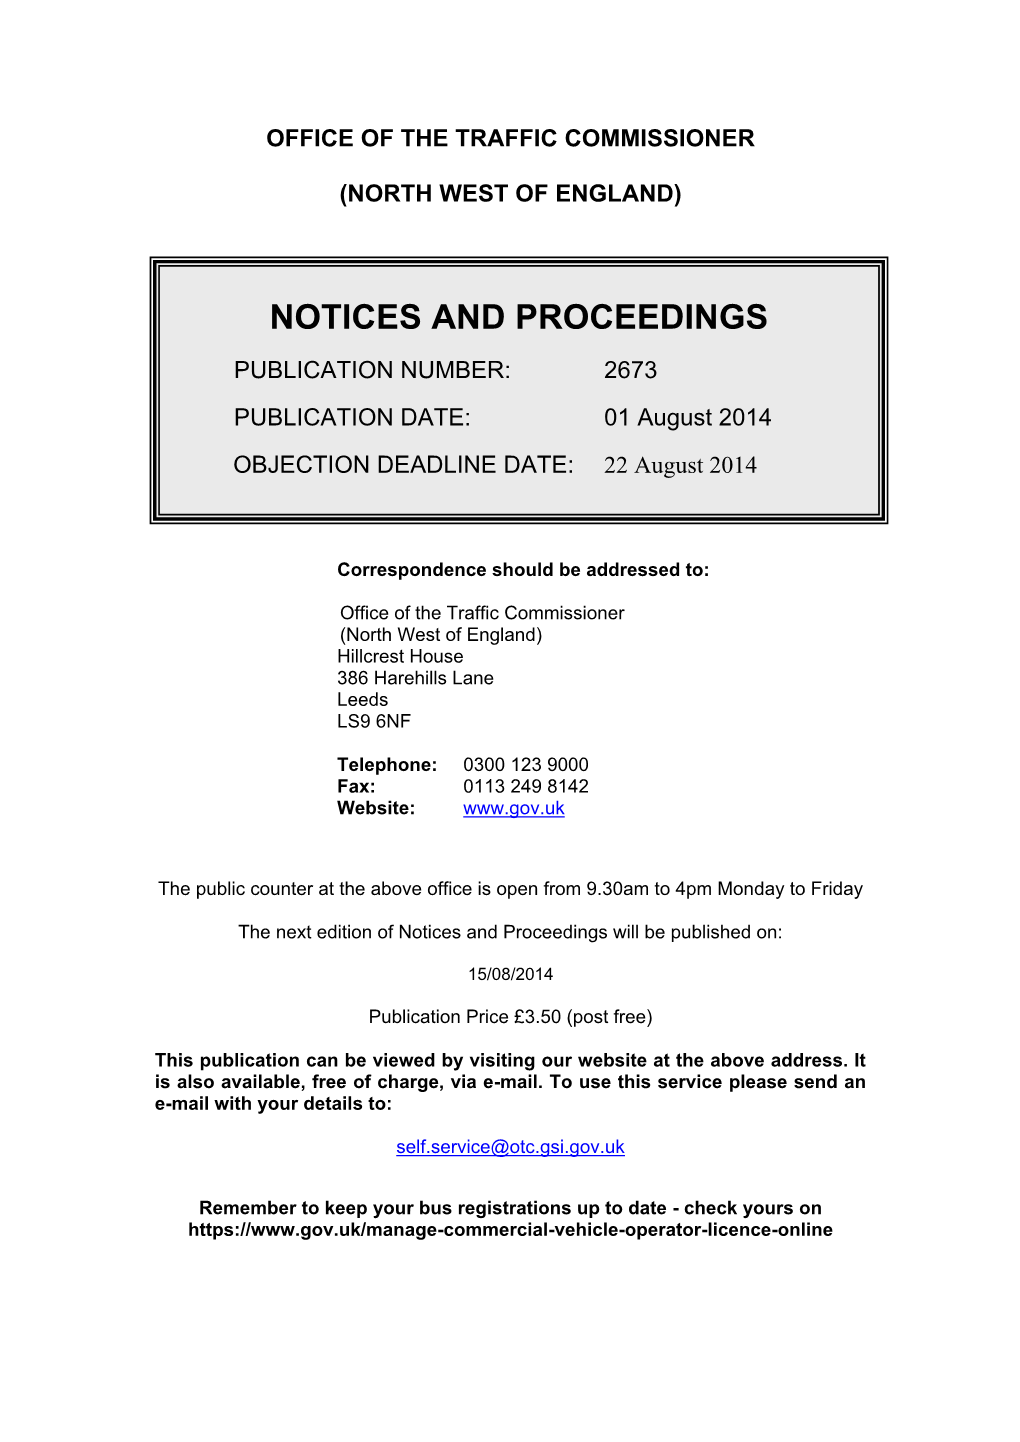 Notices and Proceedings 1 August 2014